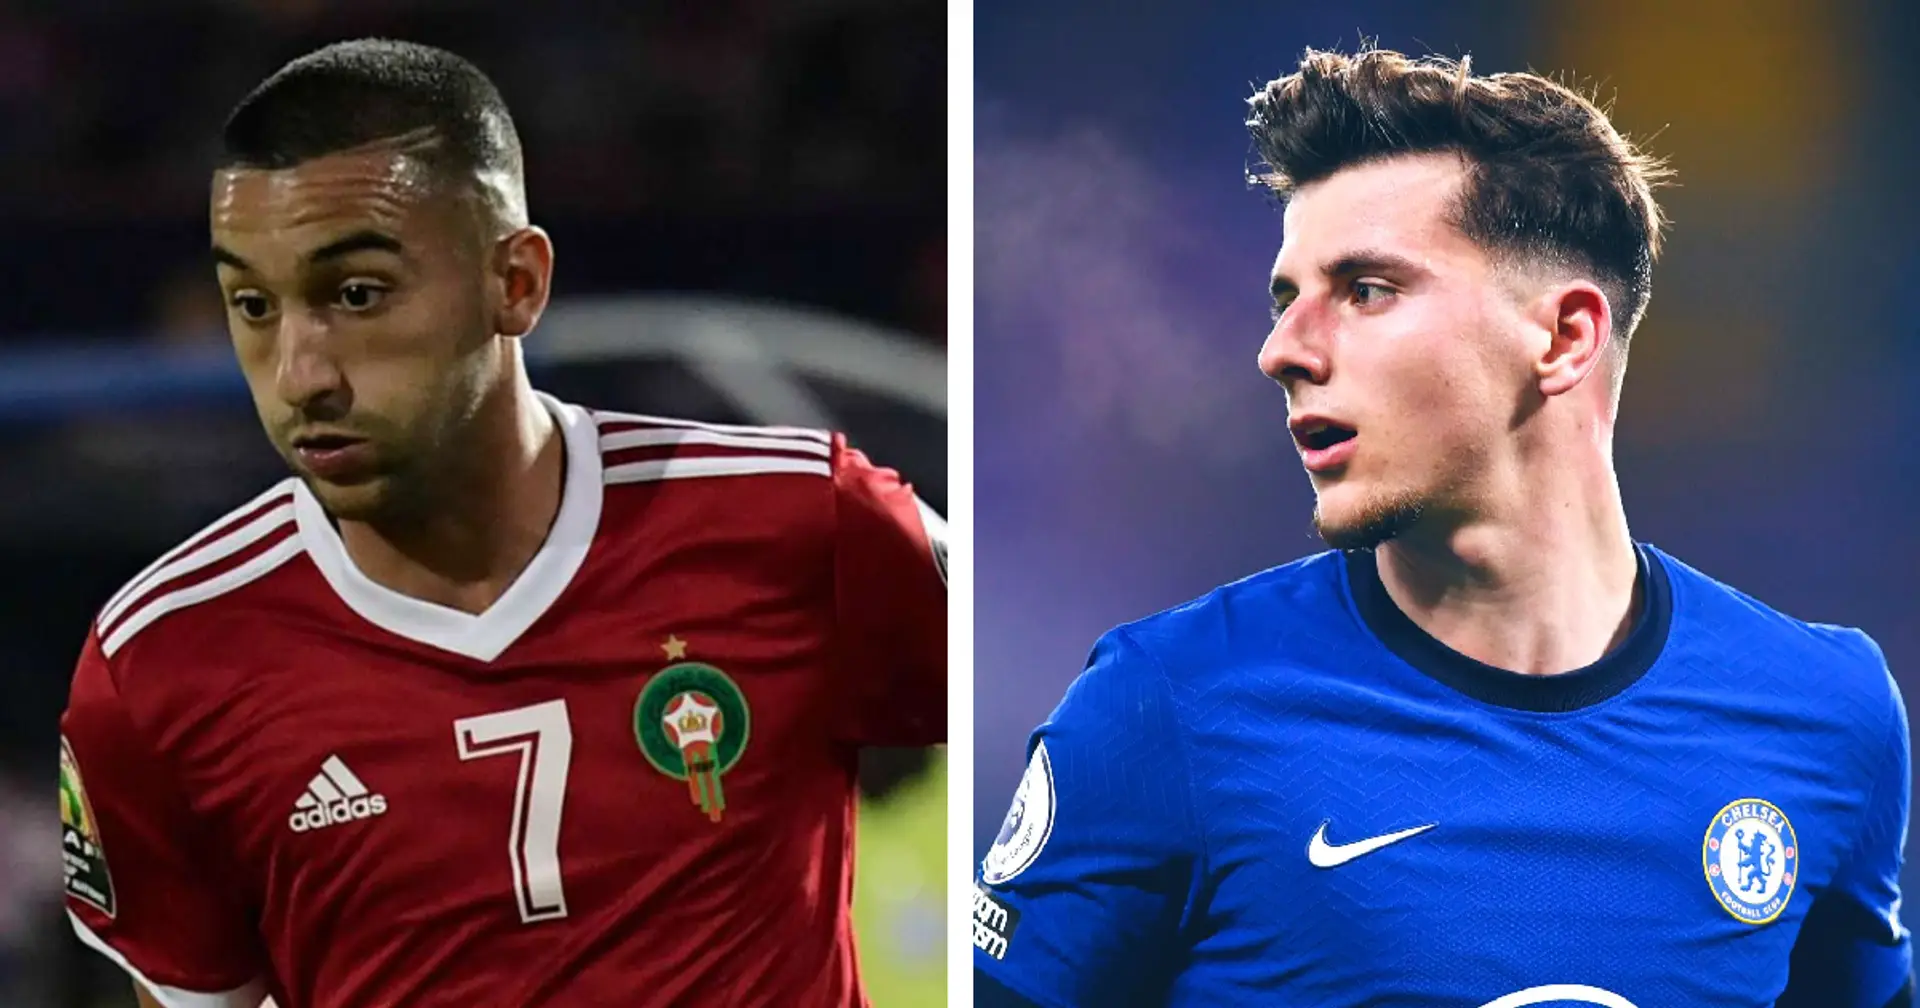 Ziyech's Morocco qualify for AFCON, Mount leads league in key stat: Latest Chelsea news round-up